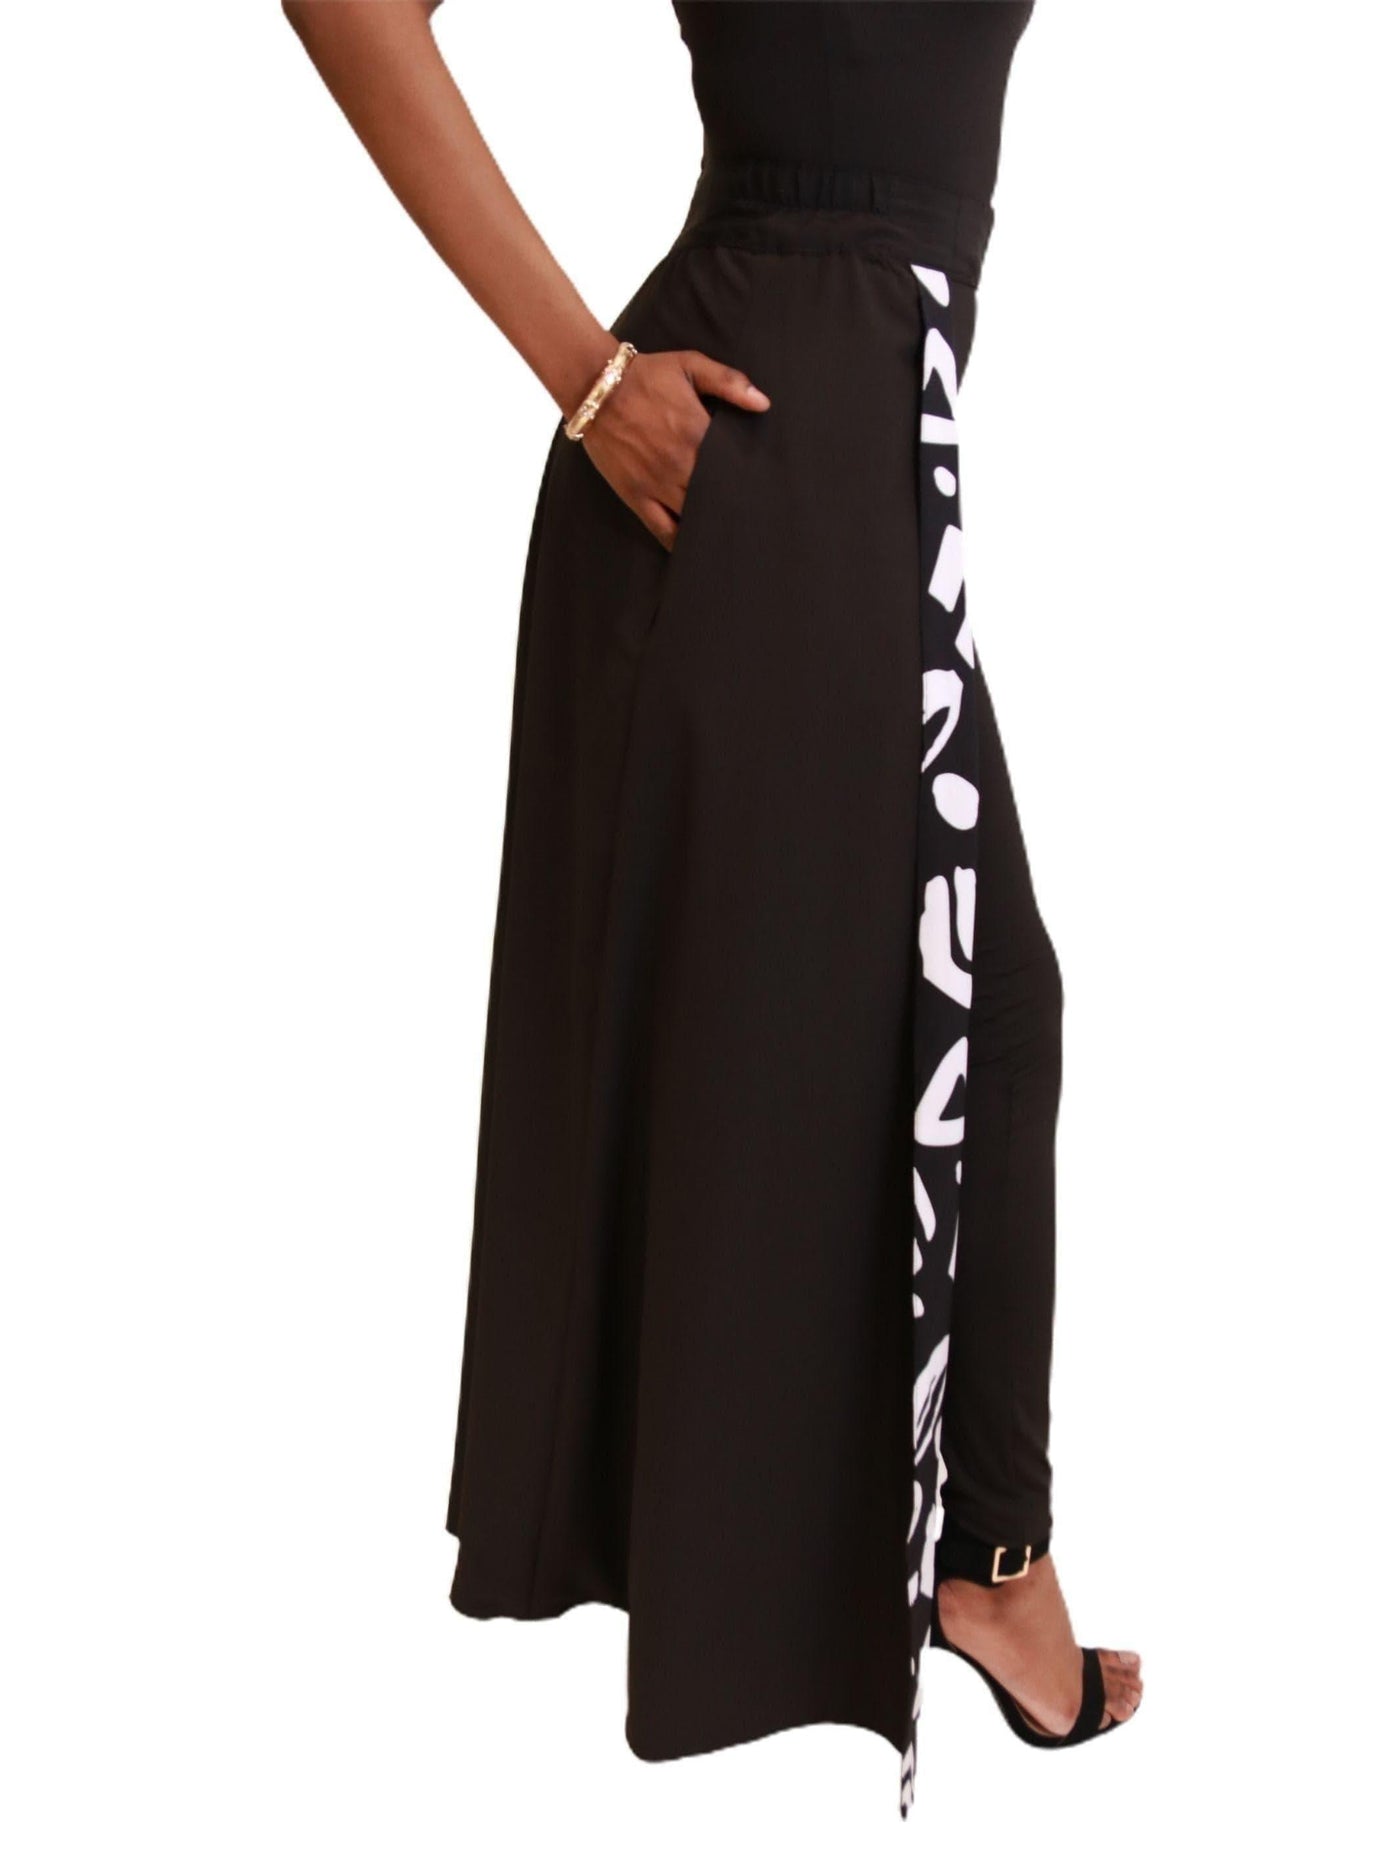 Say That Again | Reversible Open Front Maxi Skirt - Statement Piece NY _tab_plus-size-size-chart, _tab_size-chart, Bottom, Bottoms, Maxi Skirt, Reversible, Skirt, statement, Statement Clothing, statement piece, Statement Piece Boutique, statement piece ny, Statement Pieces, Statement Pieces Boutique Skirts